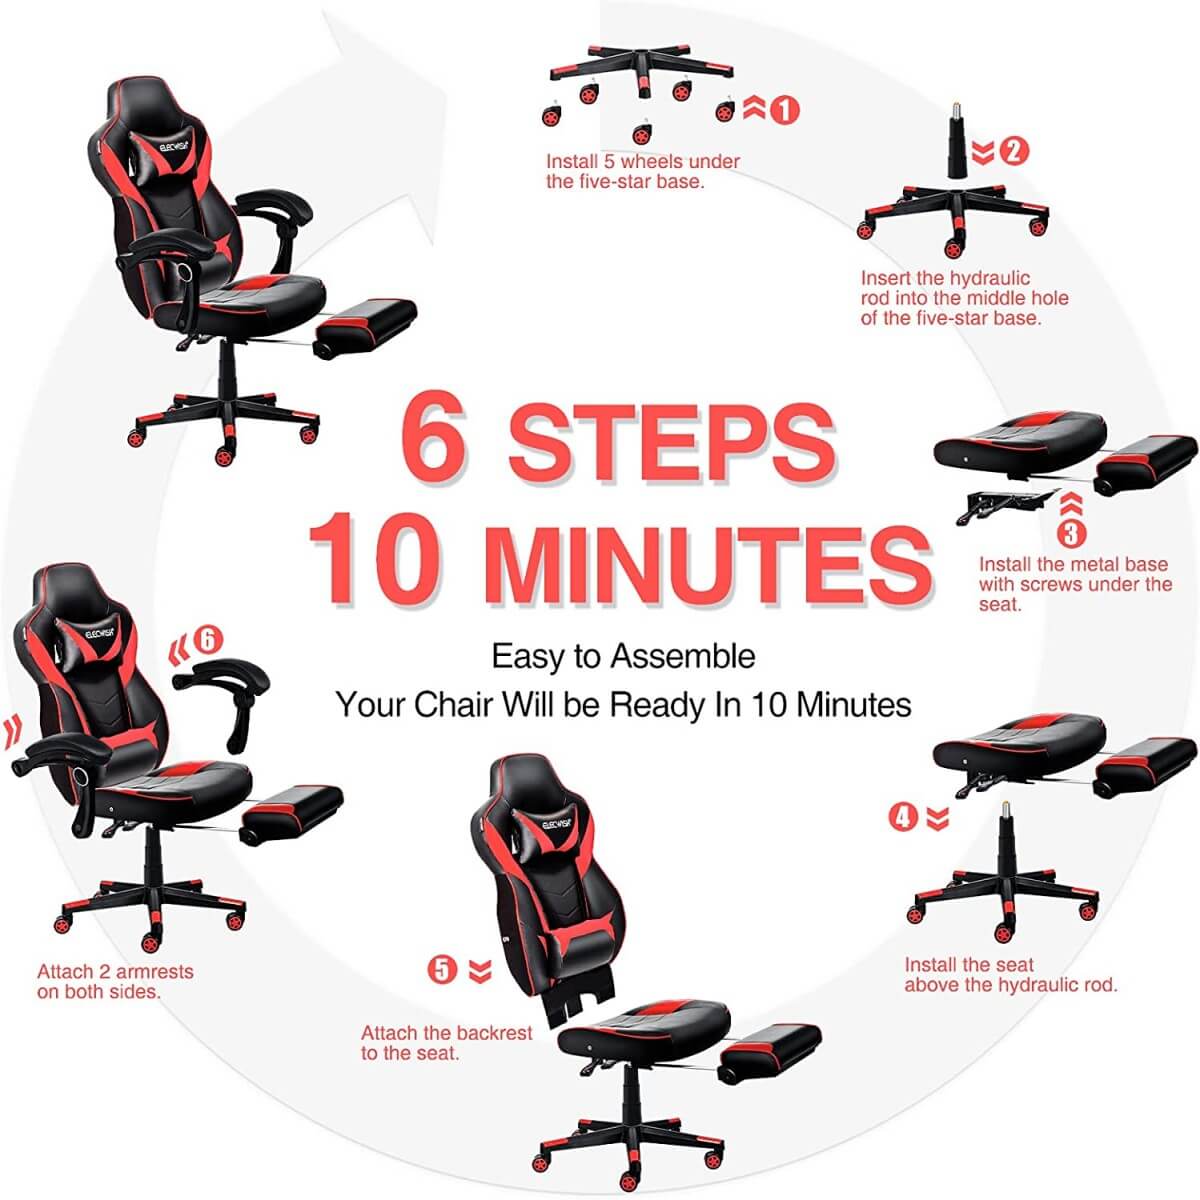 Elecwish Video Game Chairs Gaming Chair With Footrest OC087 is easy to assemble